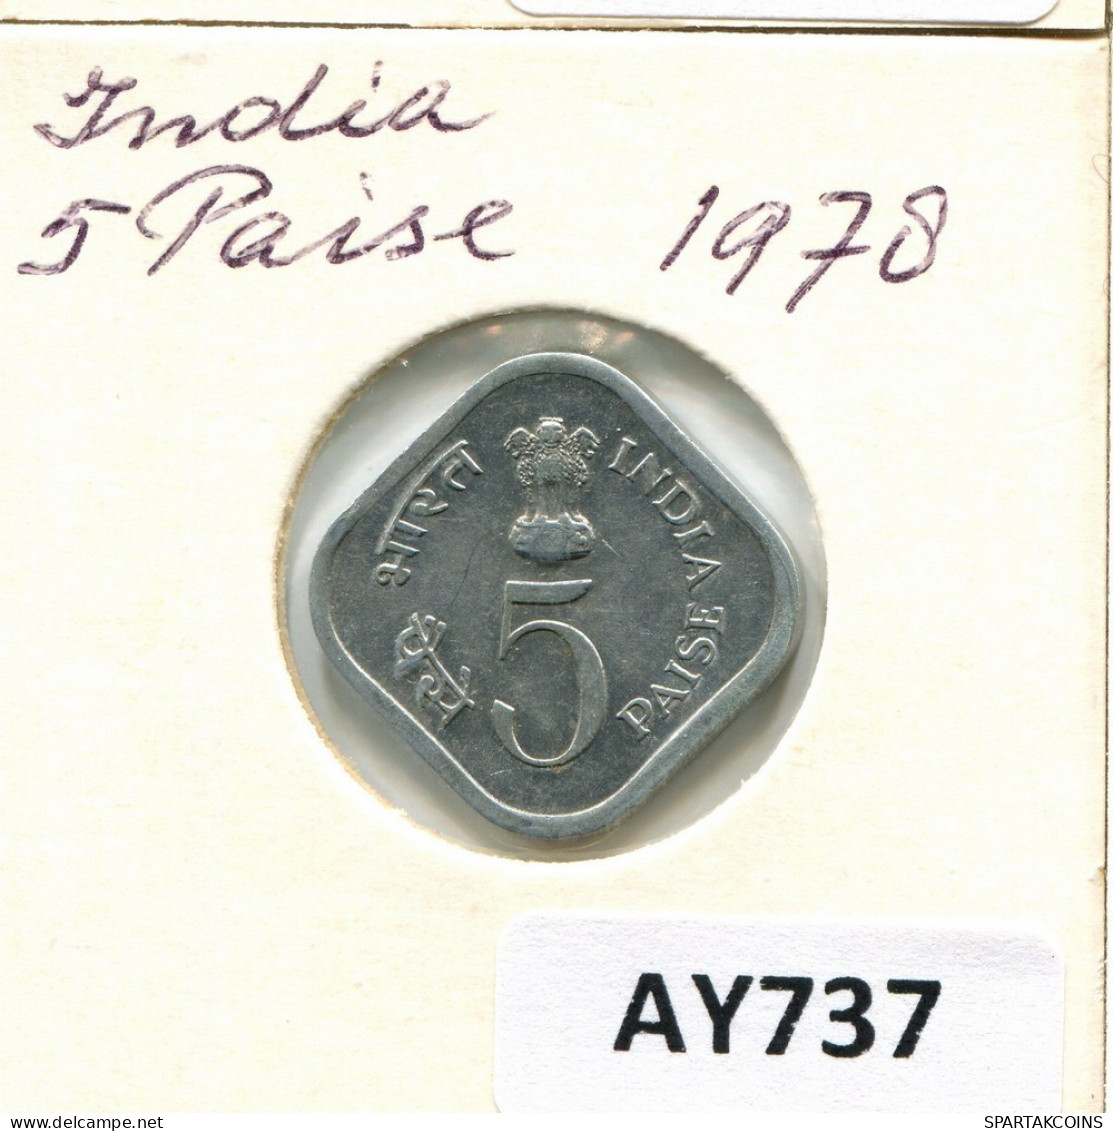 5 PAISE 1978 INDIEN INDIA Münze #AY737.D.A - India